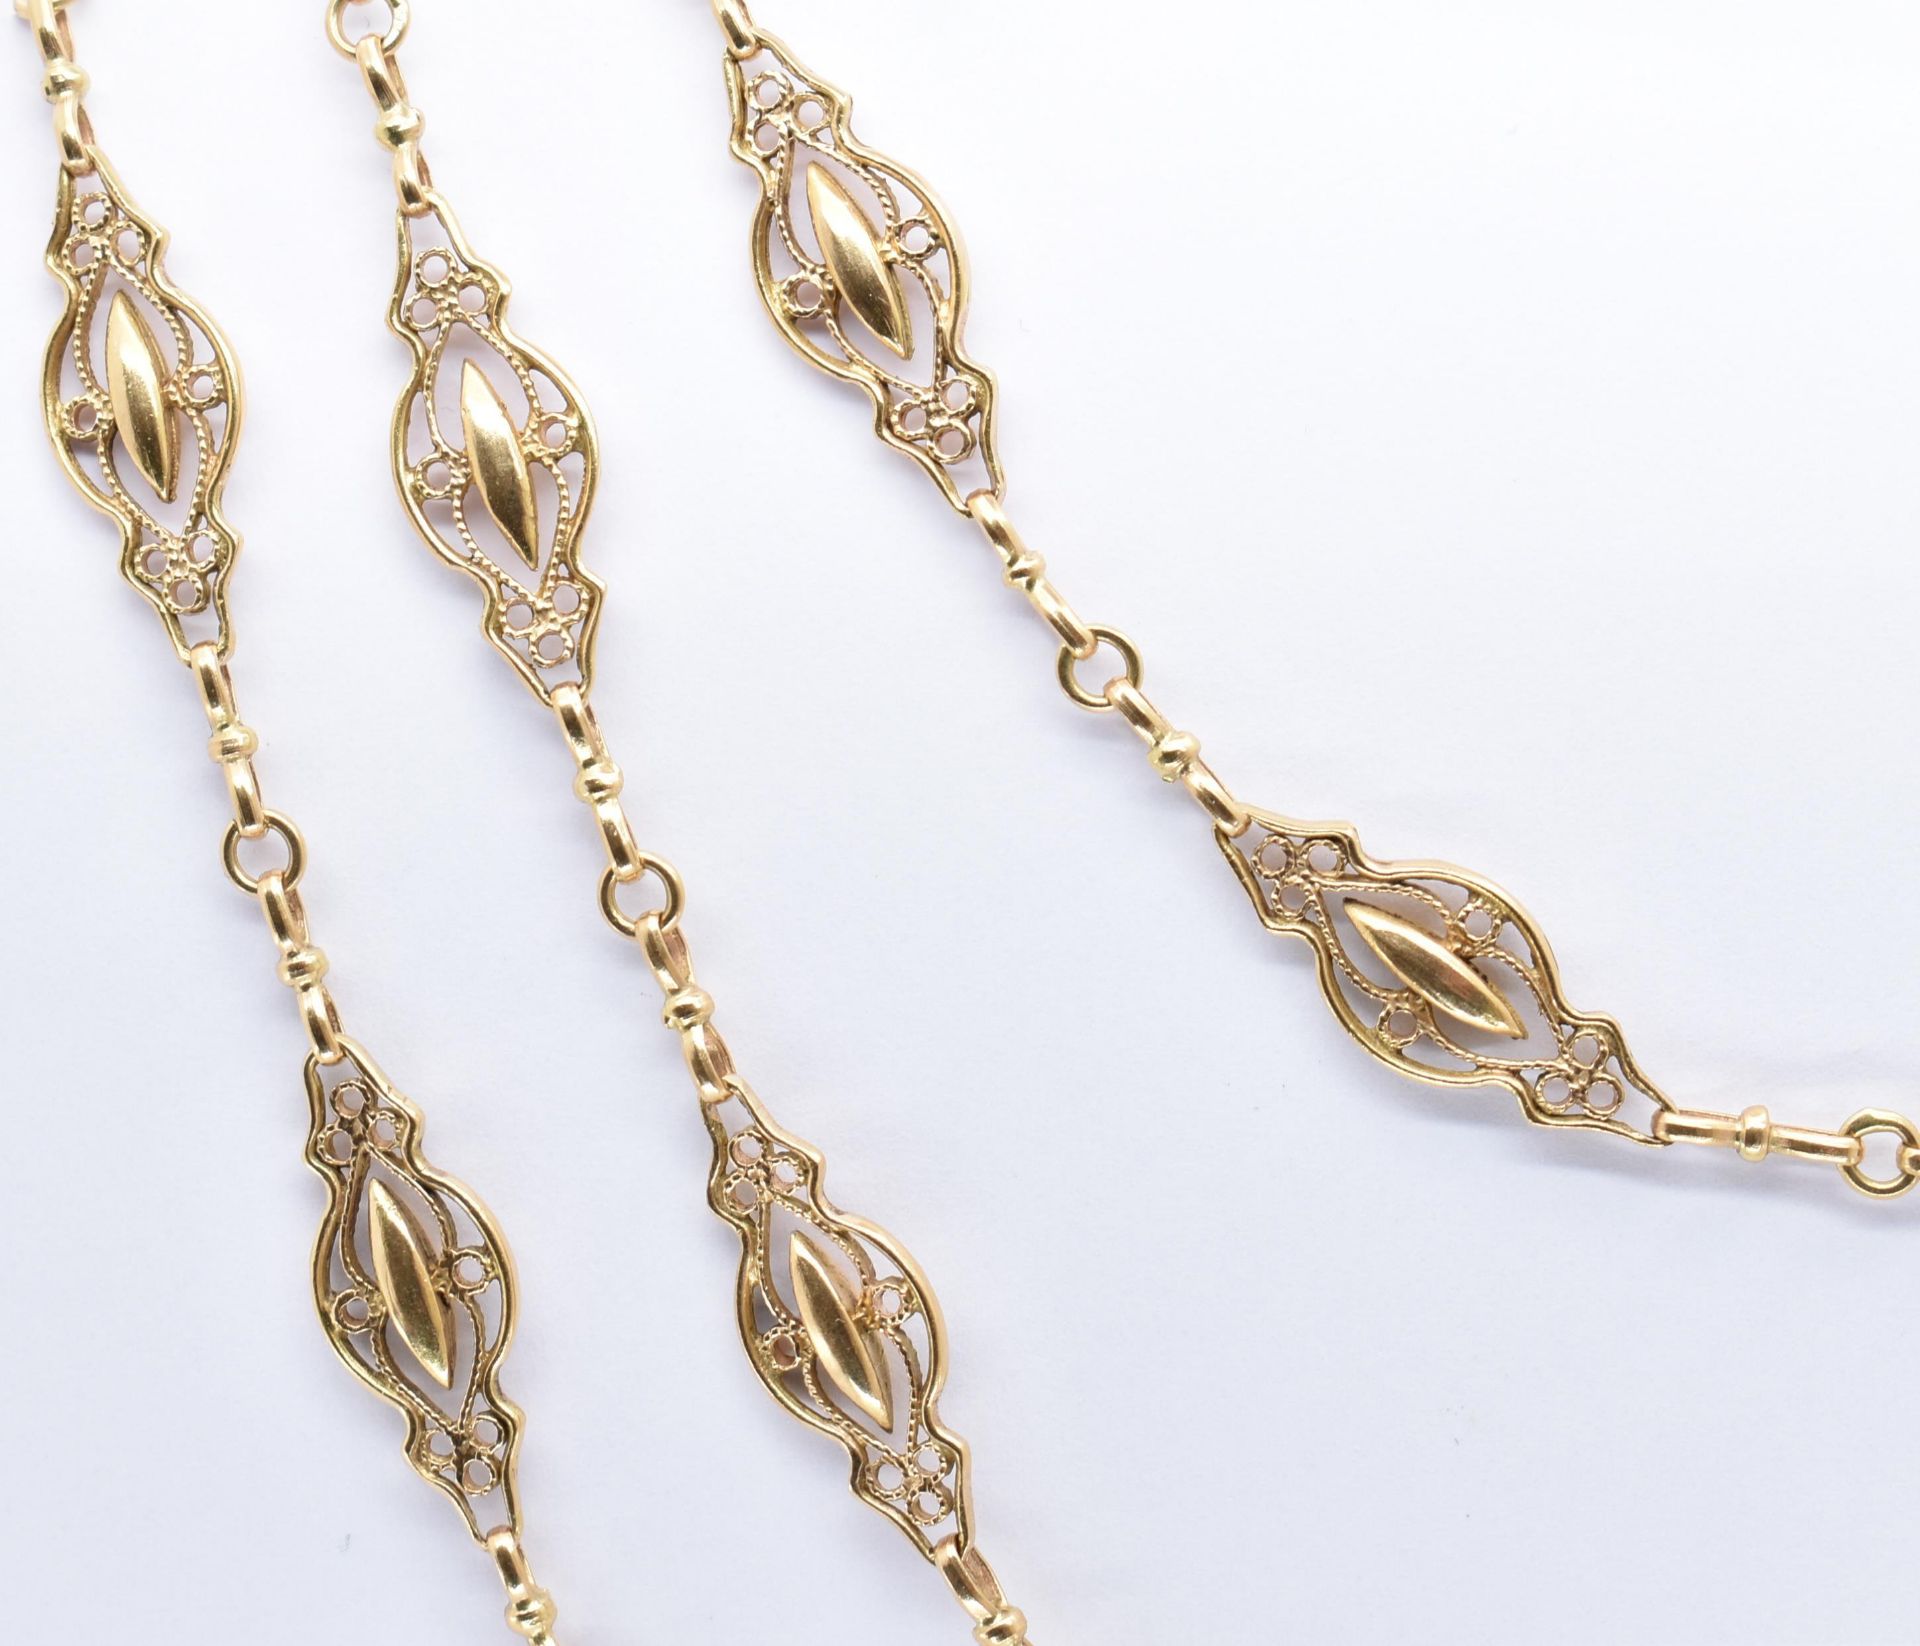 FRENCH 18CT GOLD LONG GUARD CHAIN NECKLACE - Image 3 of 4